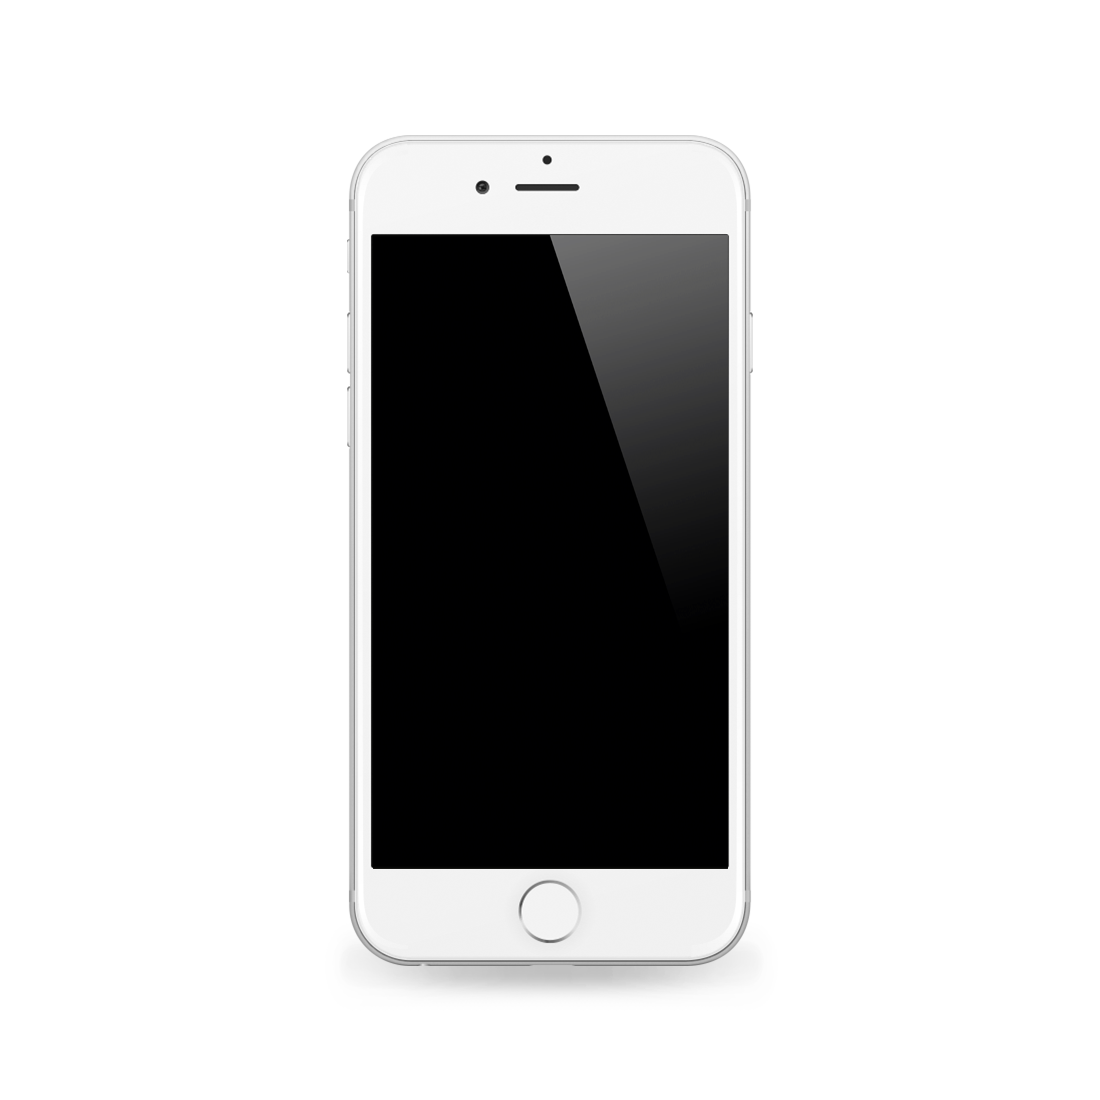 Apple Iphone 7 Plus Iphone 5 Iphone 6s Plus Vivo V7 Plus Png Download 1100 1100 Free Transparent Apple Iphone 7 Plus Png Download Clip Art Library